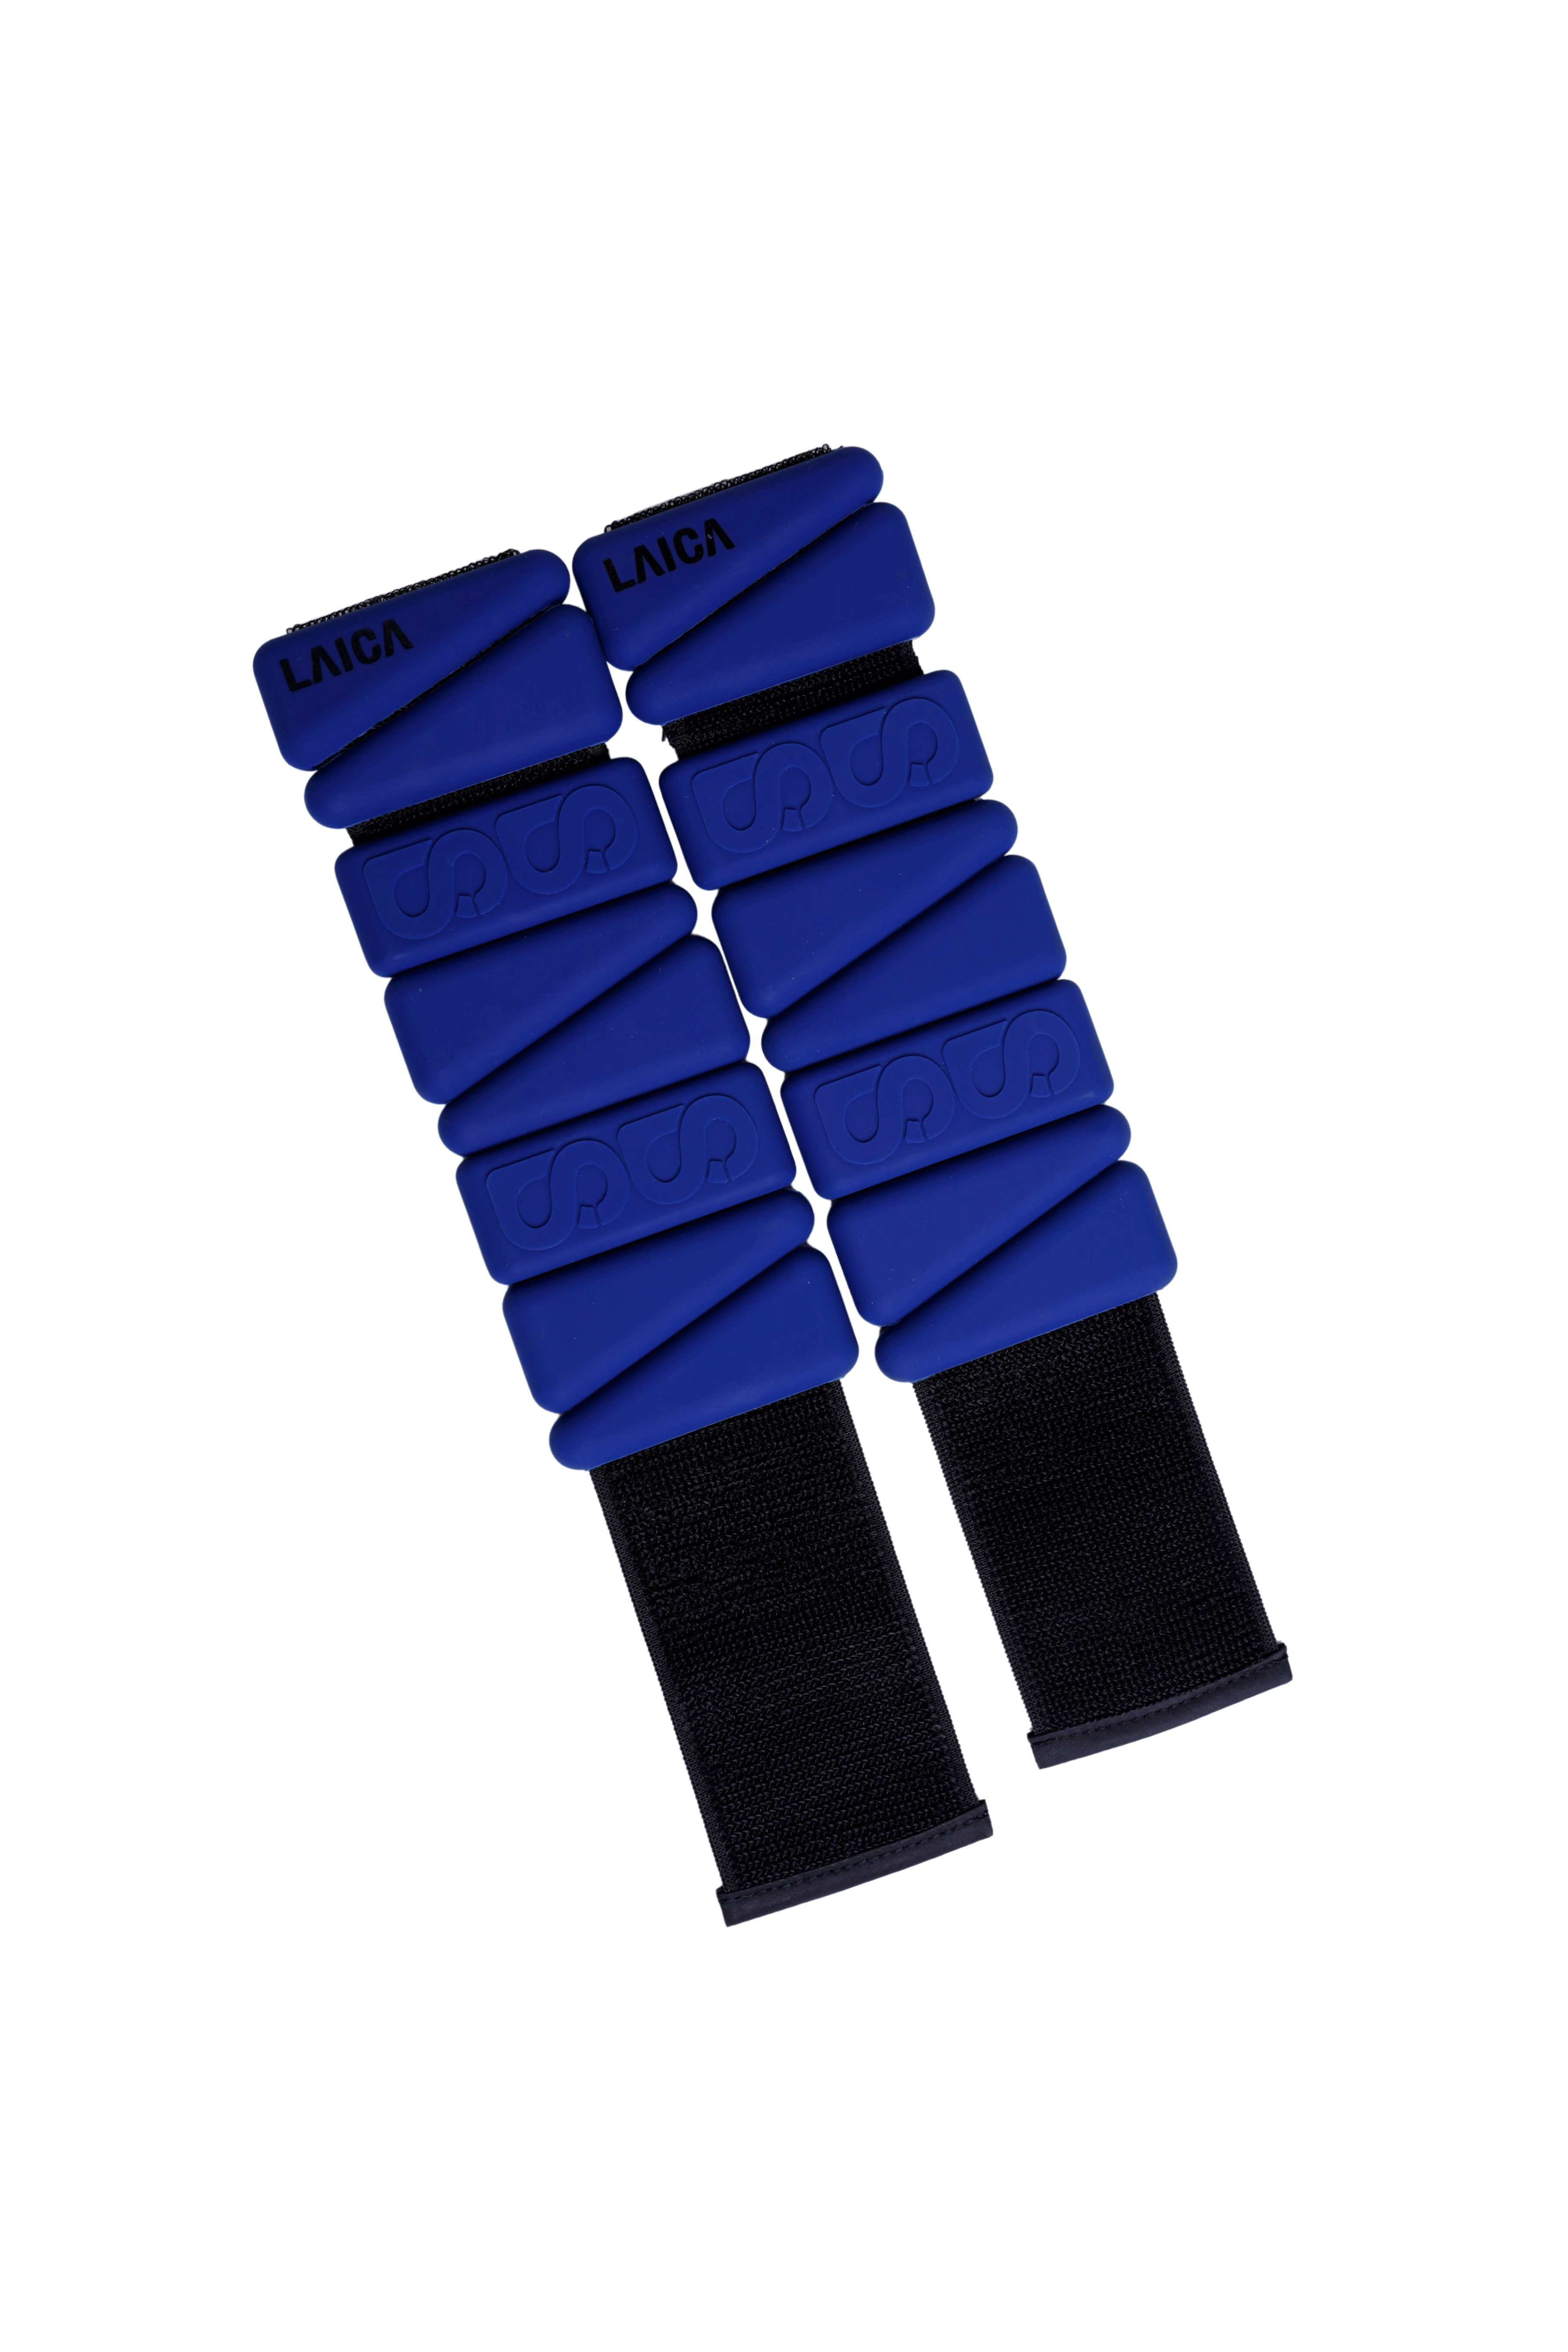 LAICA x Buttonscarves Athleisure Weighted Bangles - Navy